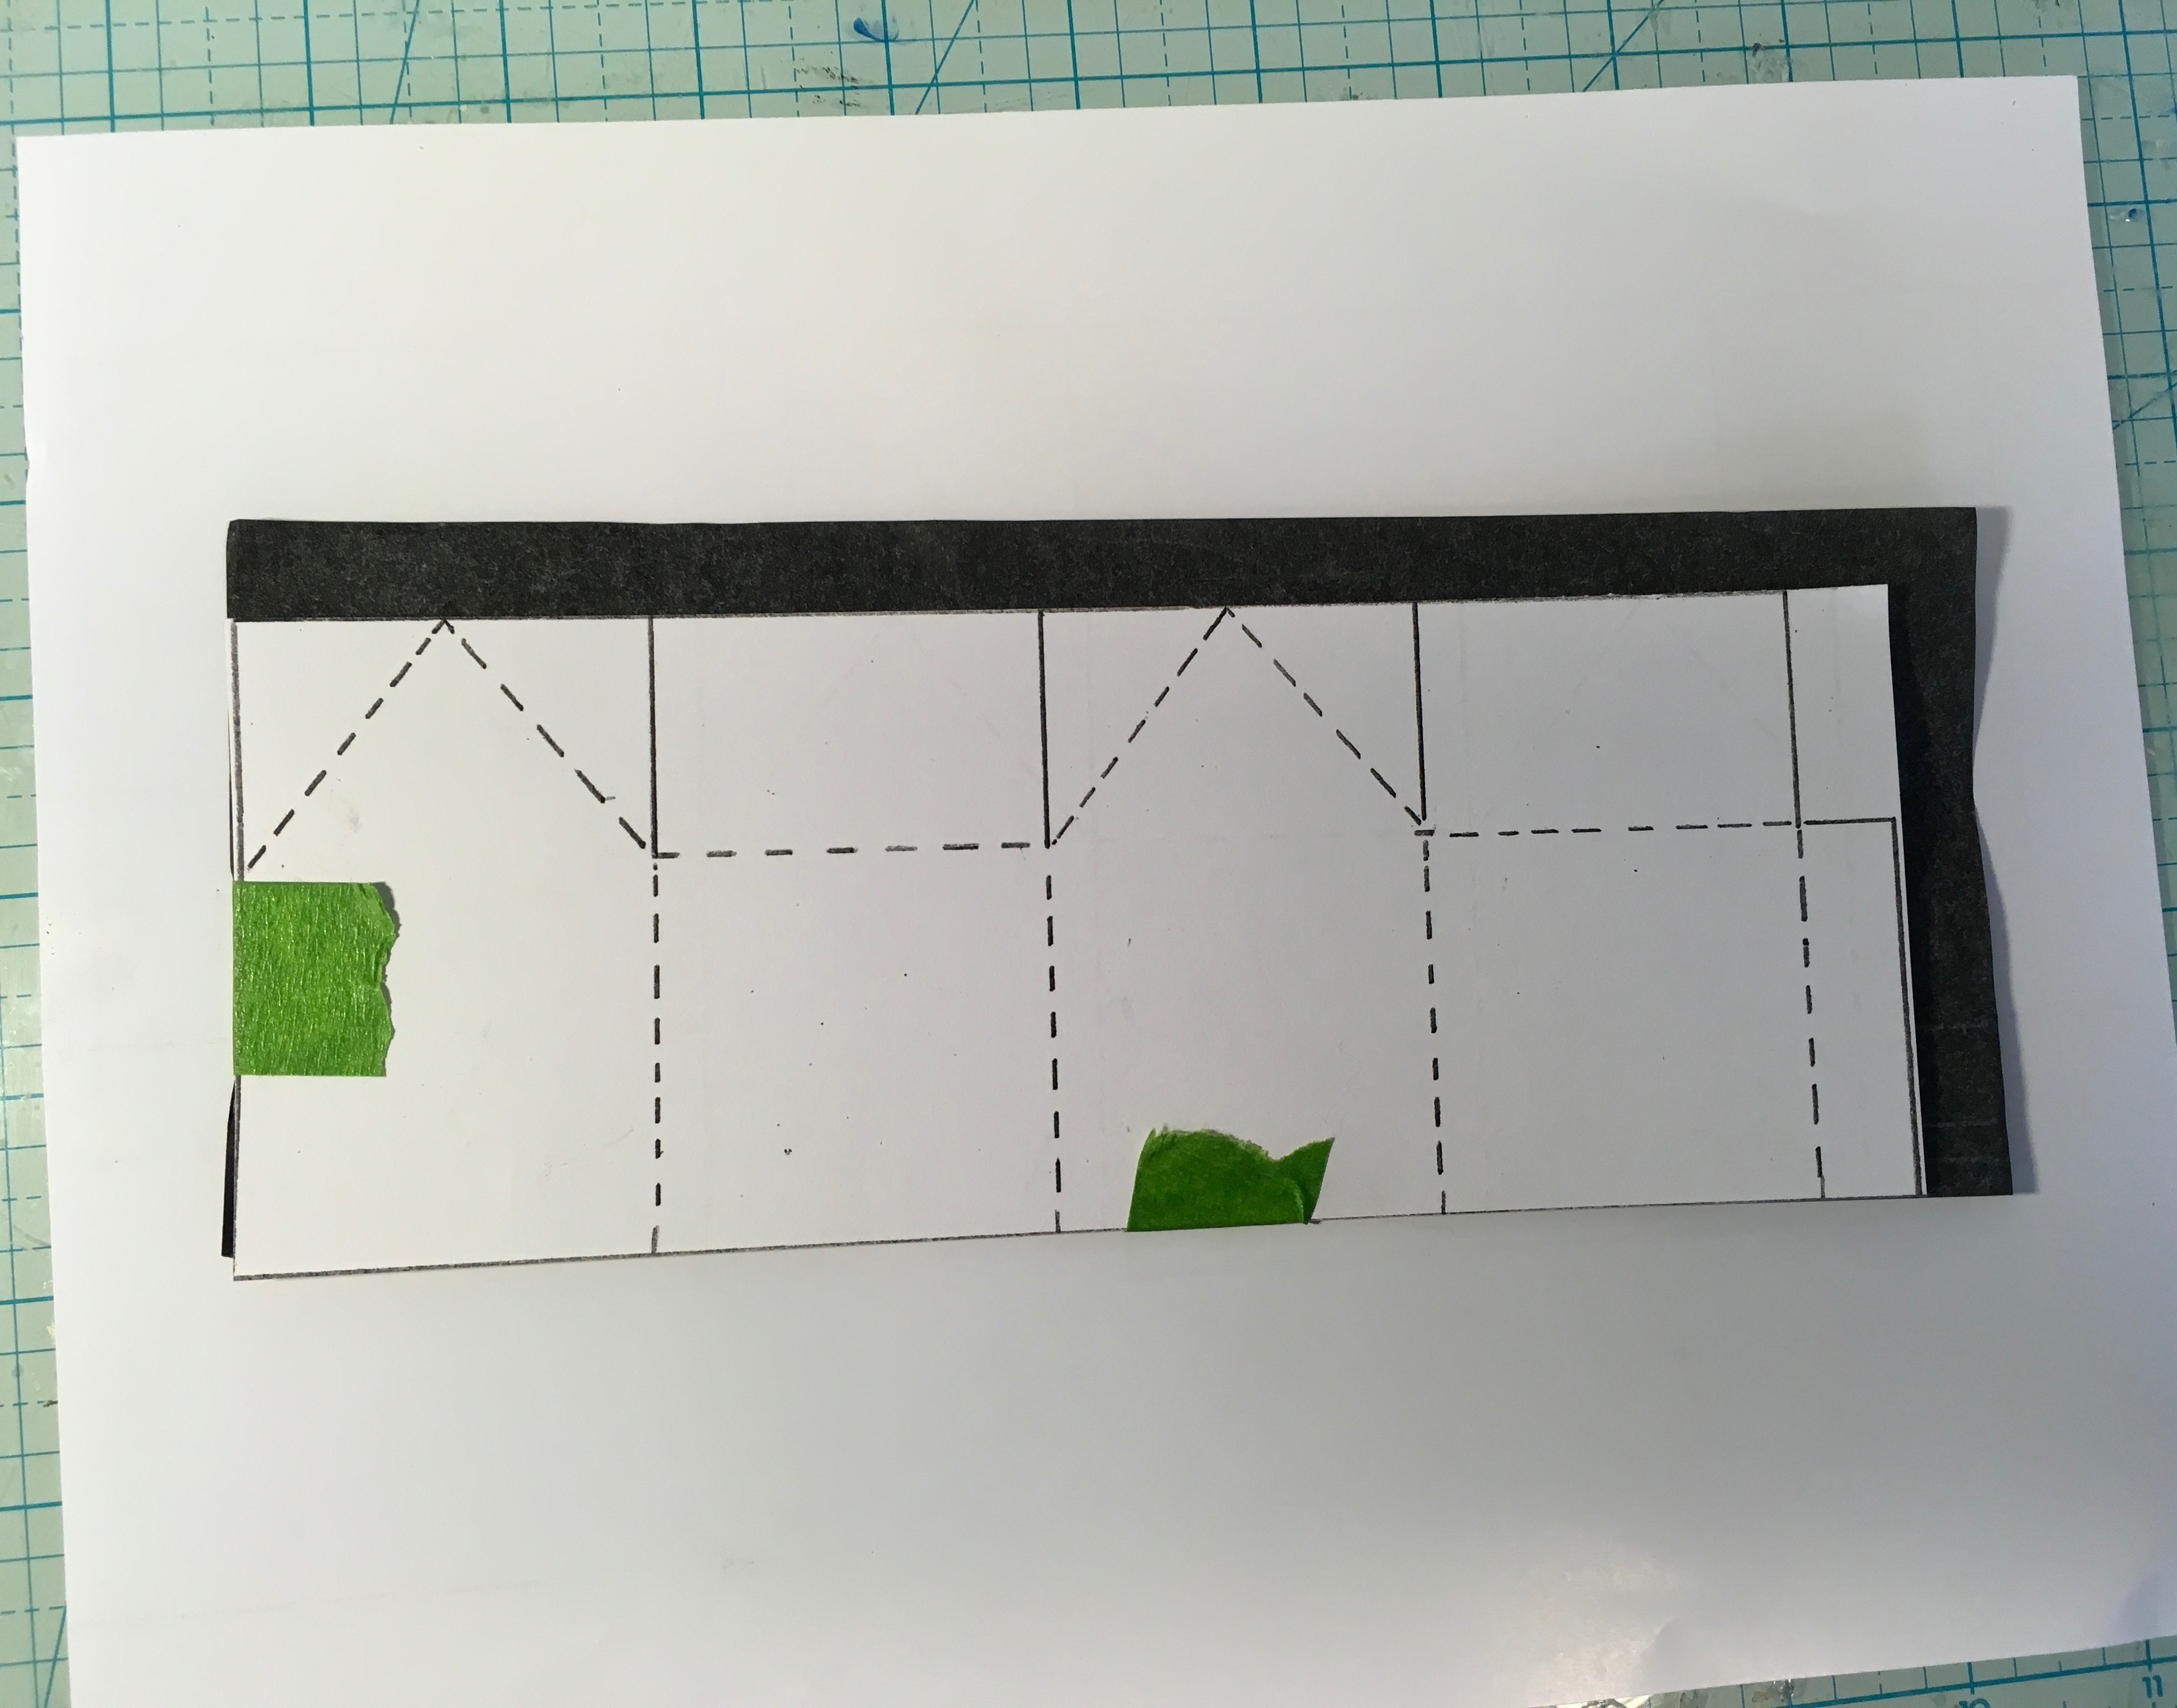 Transfer miniature house pattern to cardboard using carbon paper